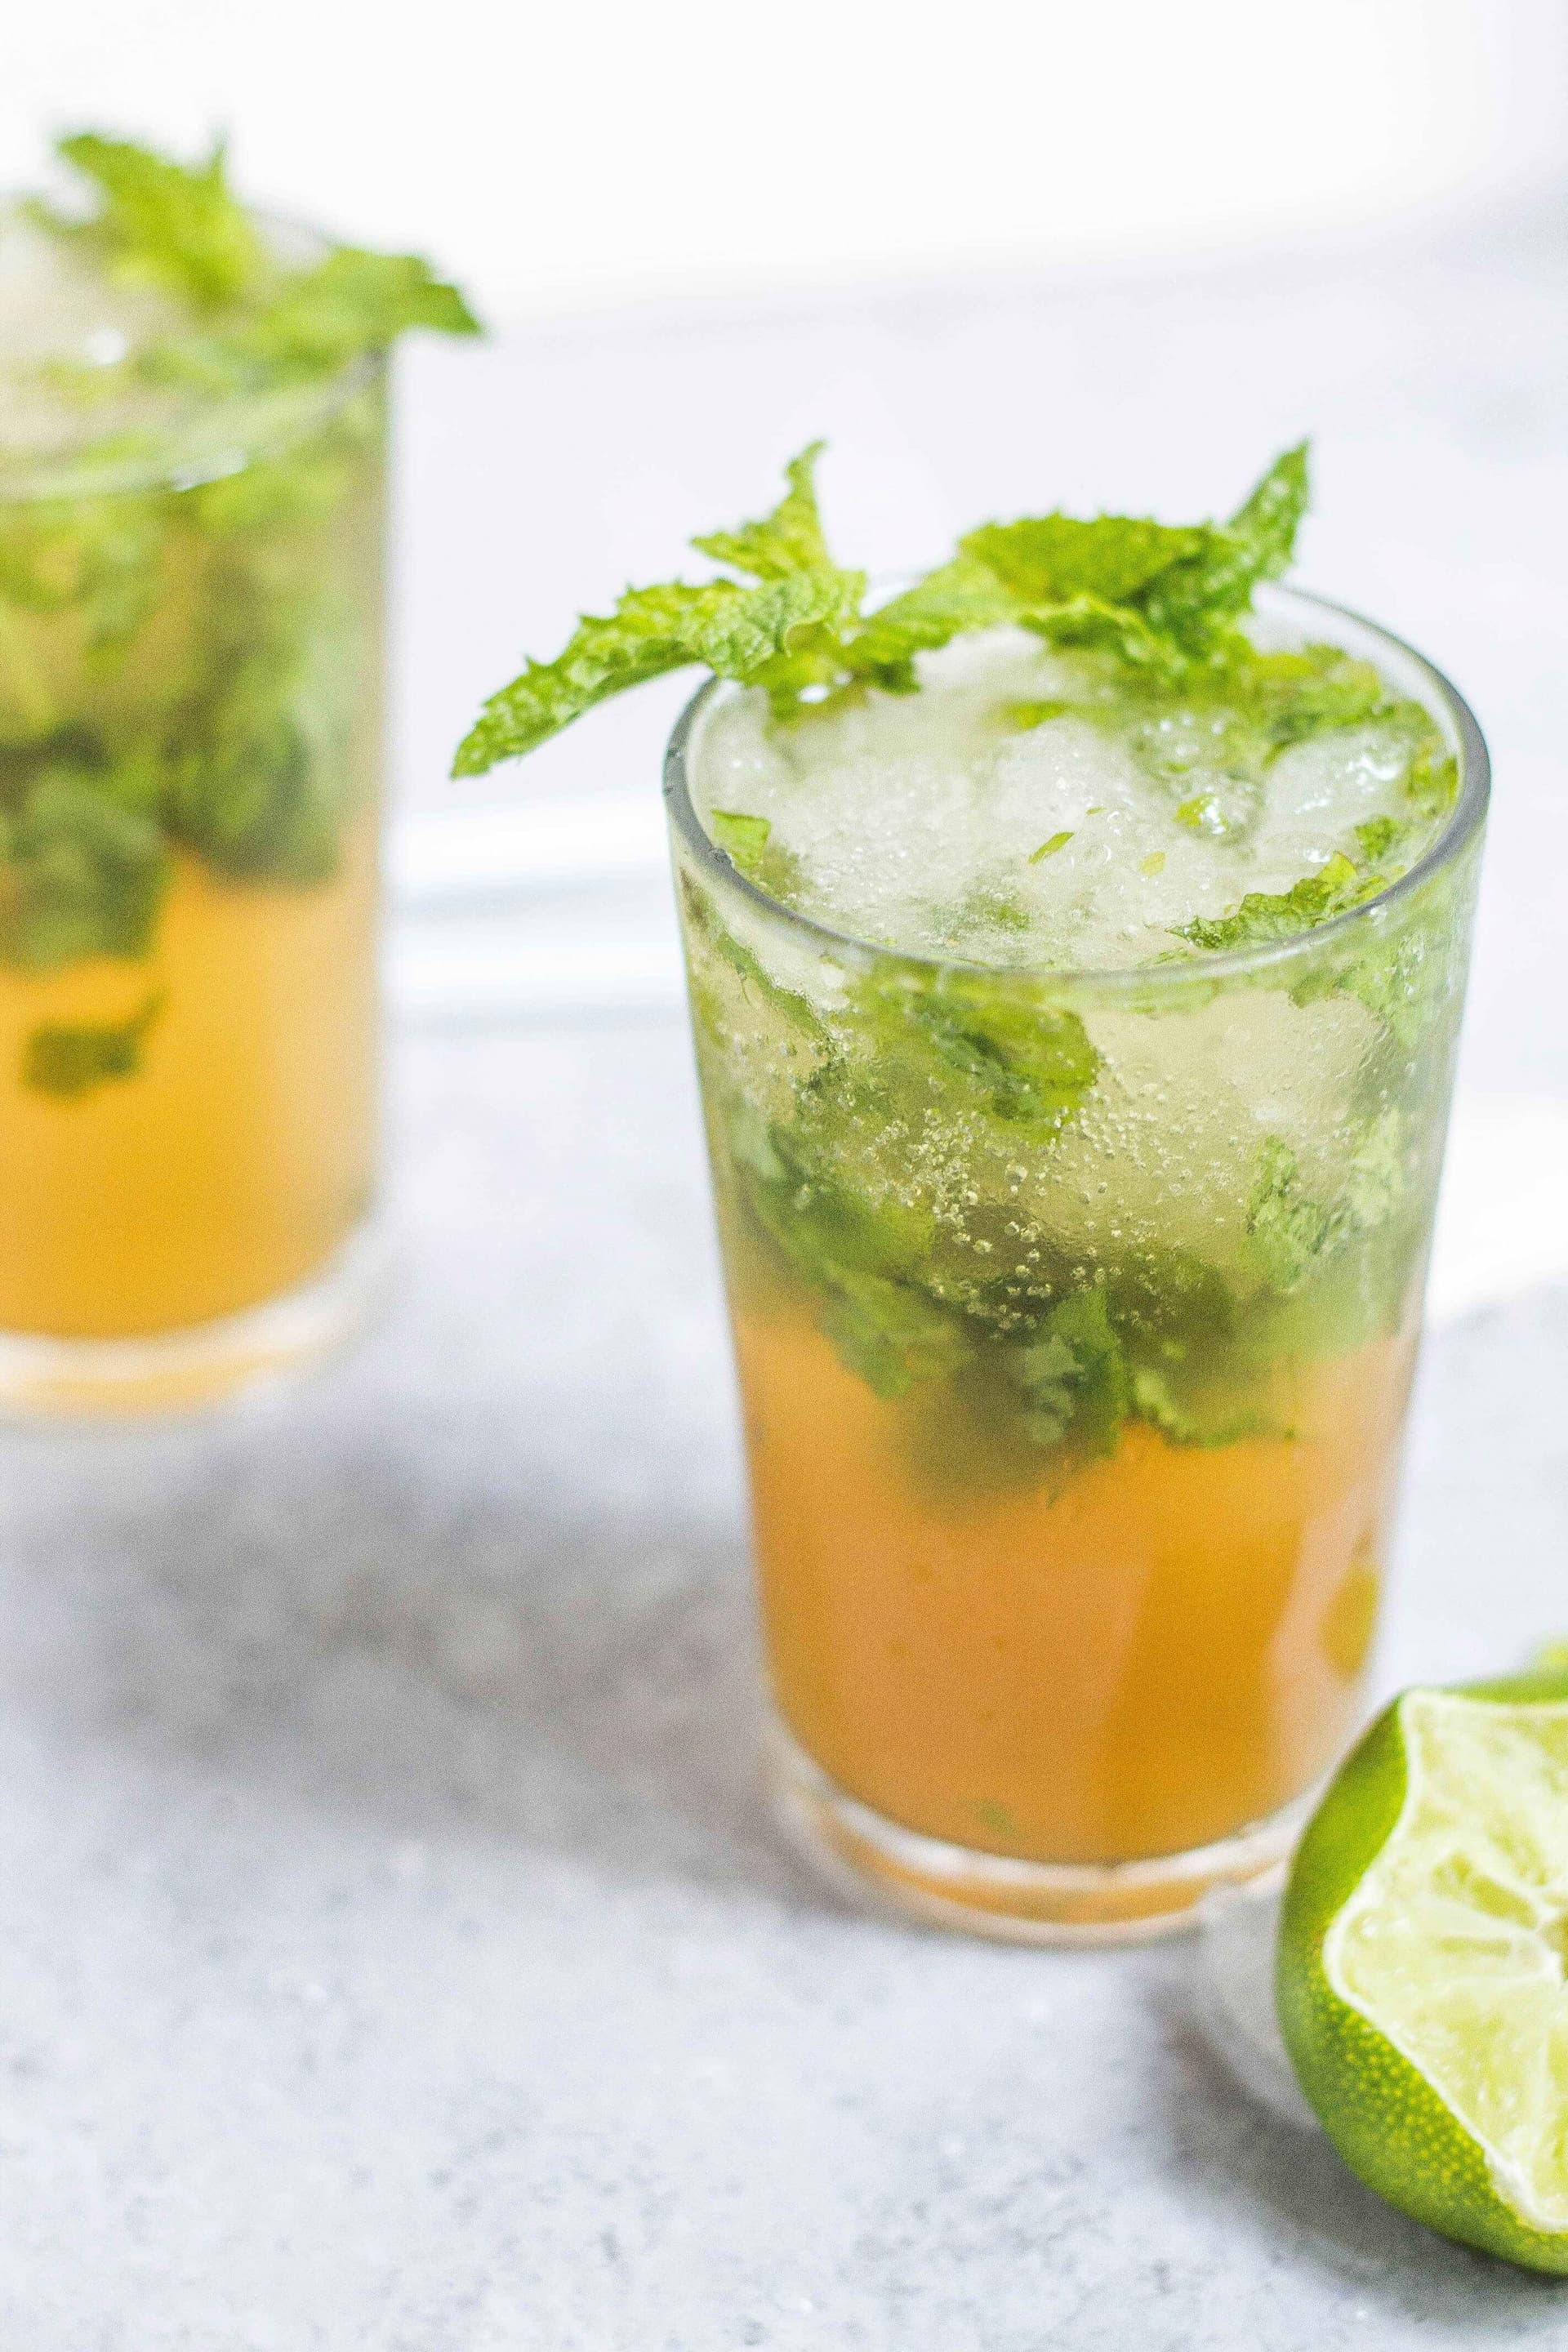 Making Aam Panna Margarita For Your Summer House Party Cocktail Needs